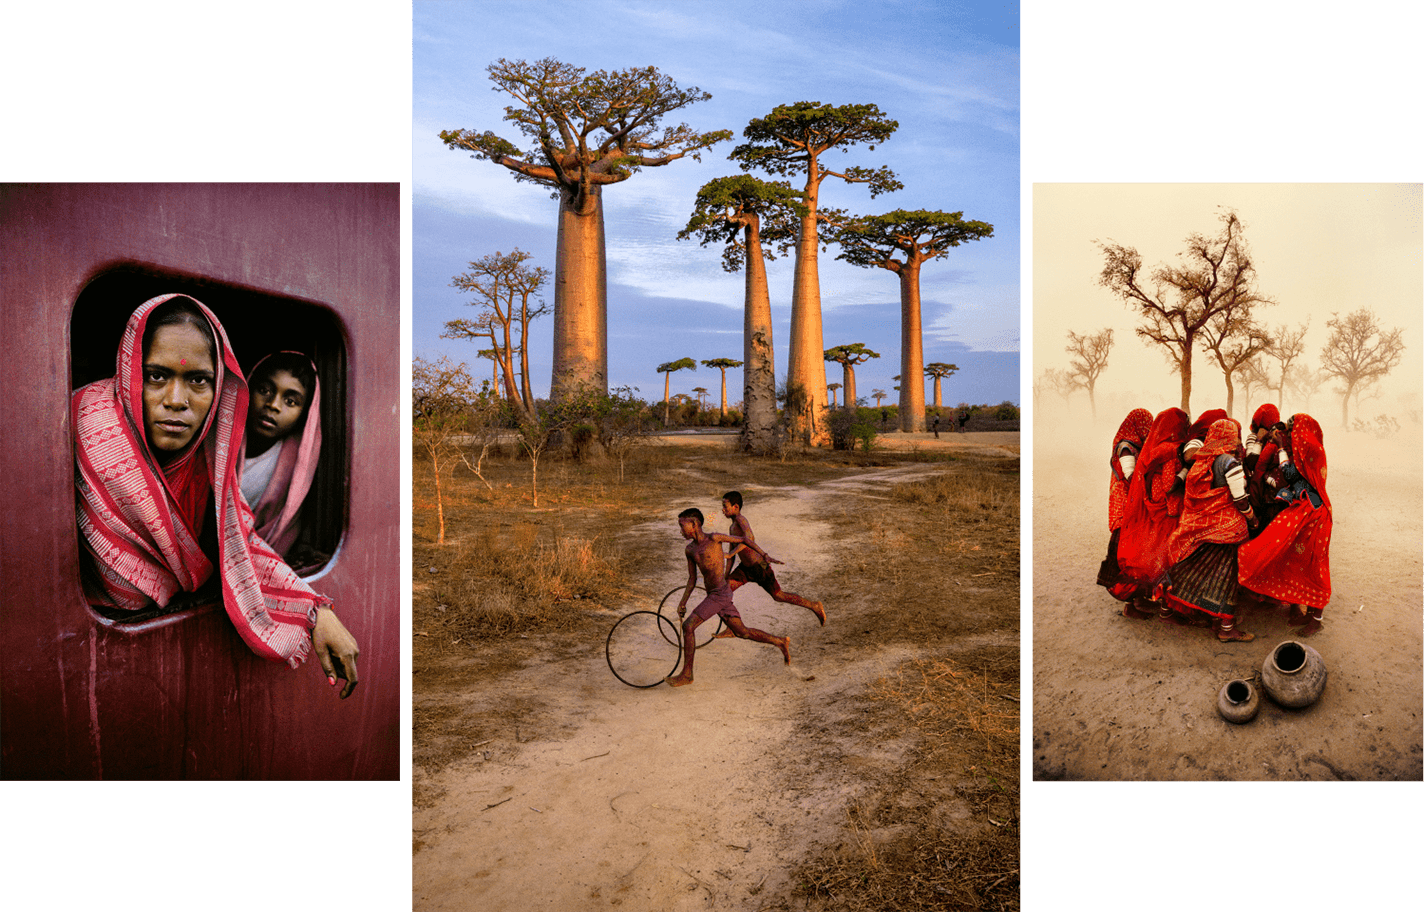 AN EXTRAORDINARY PHOTOGRAPHY EXHIBITION - Steve McCurry ICONS in Chicago: A Photography Exhibit